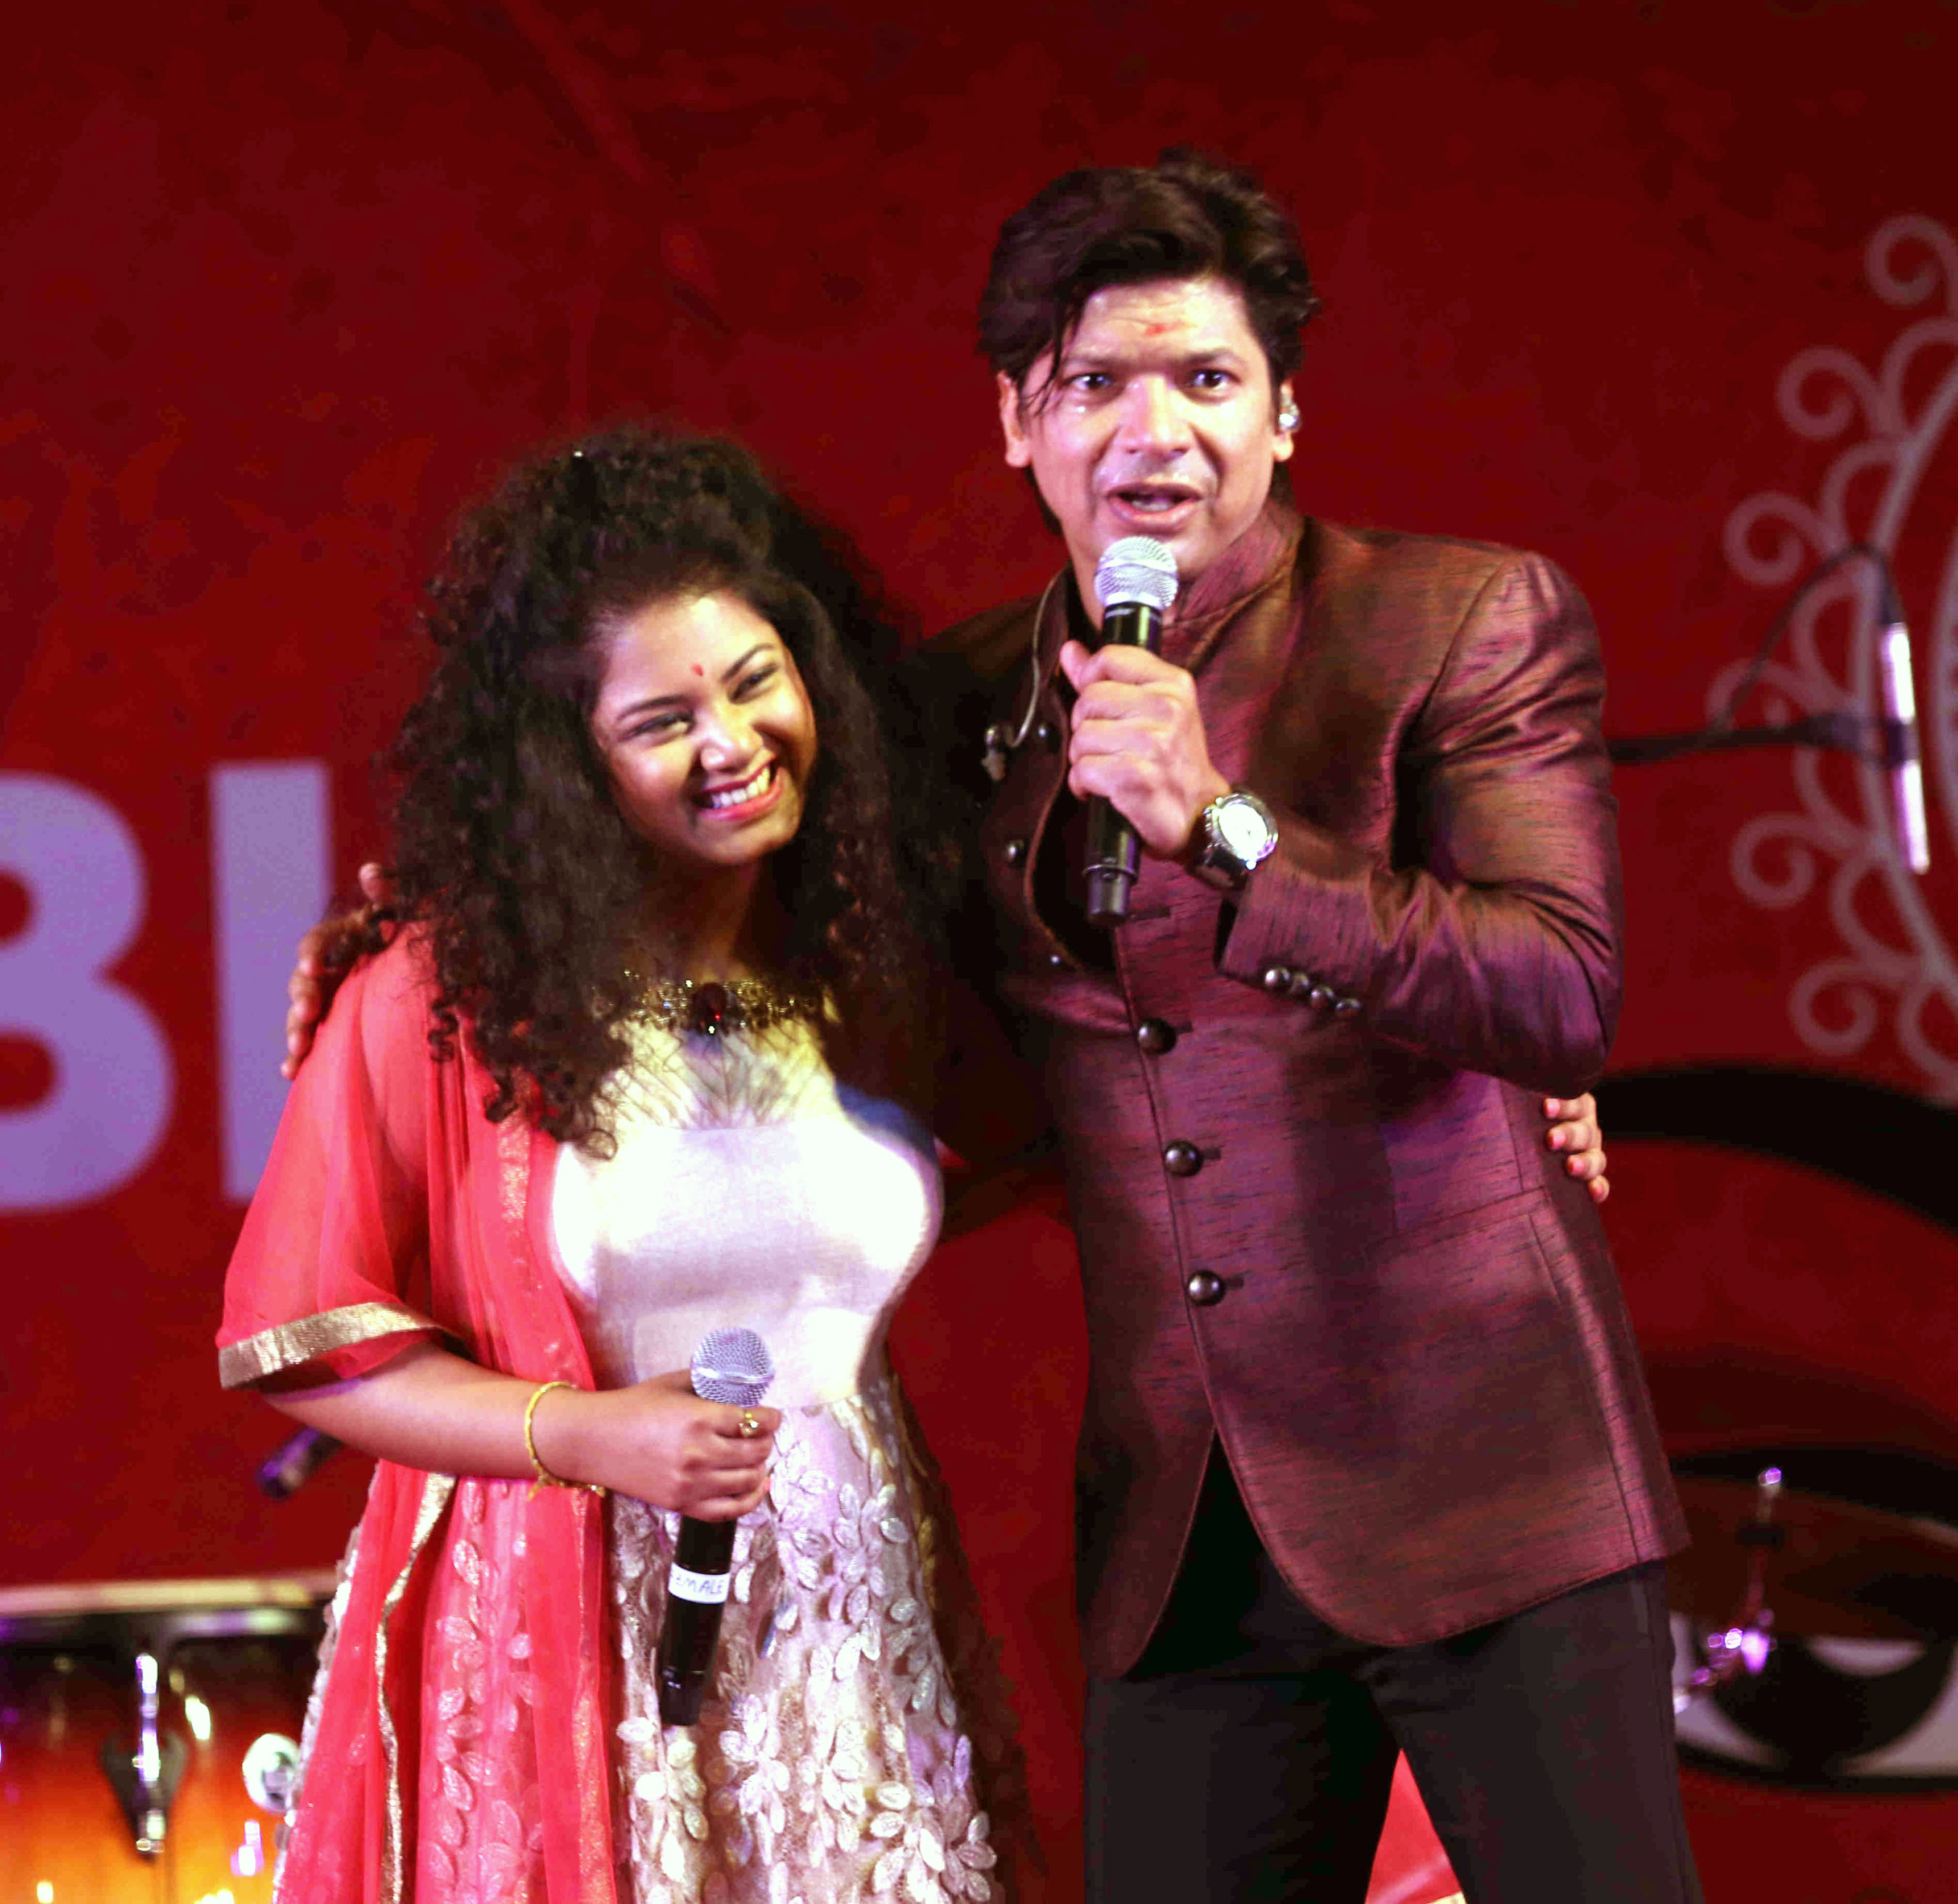 Singer Anwesshaa performed live with Shaan and Sonu Nigam at Juhu Durga puja mandal.